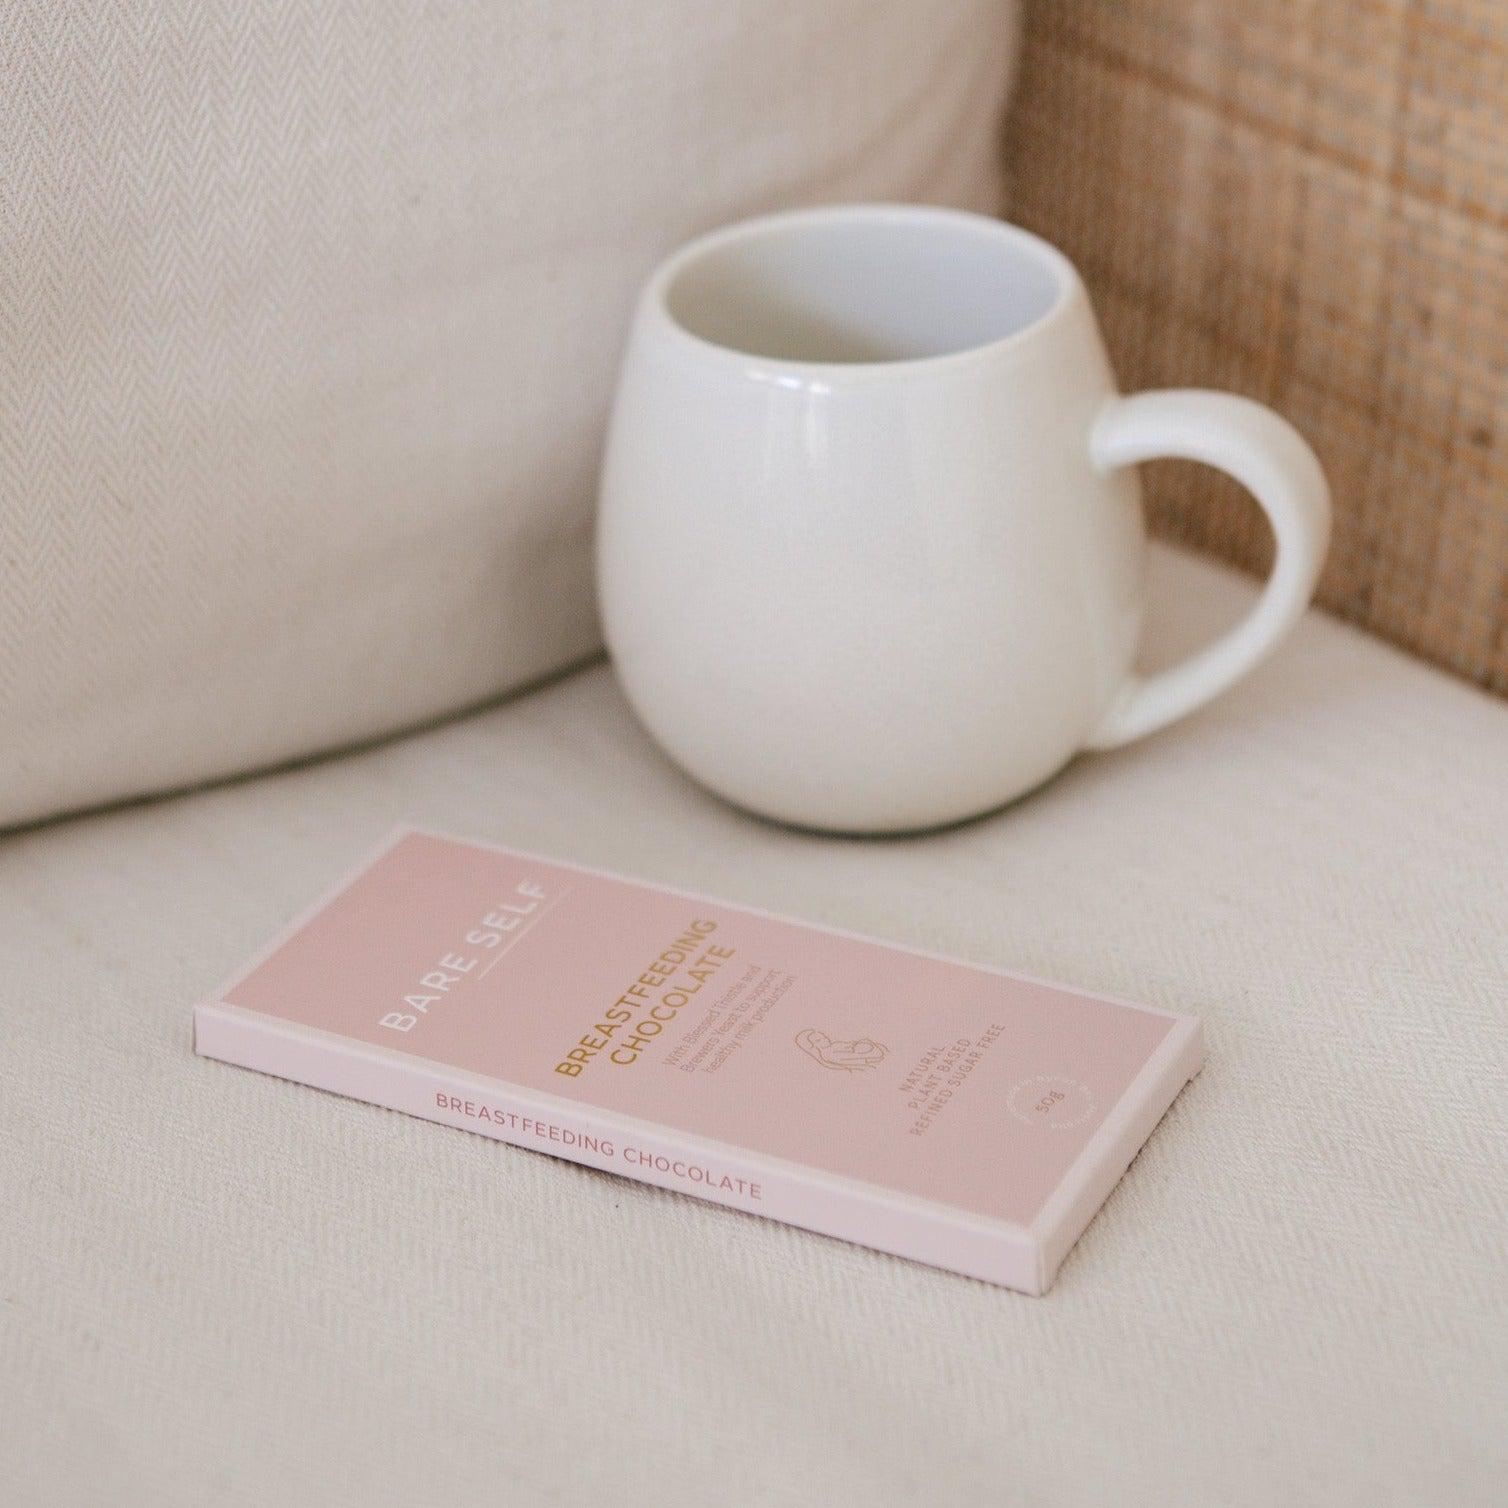 A cup of coffee from Bare Self and a breastfeeding chocolate bar from Bare Self on a white couch.